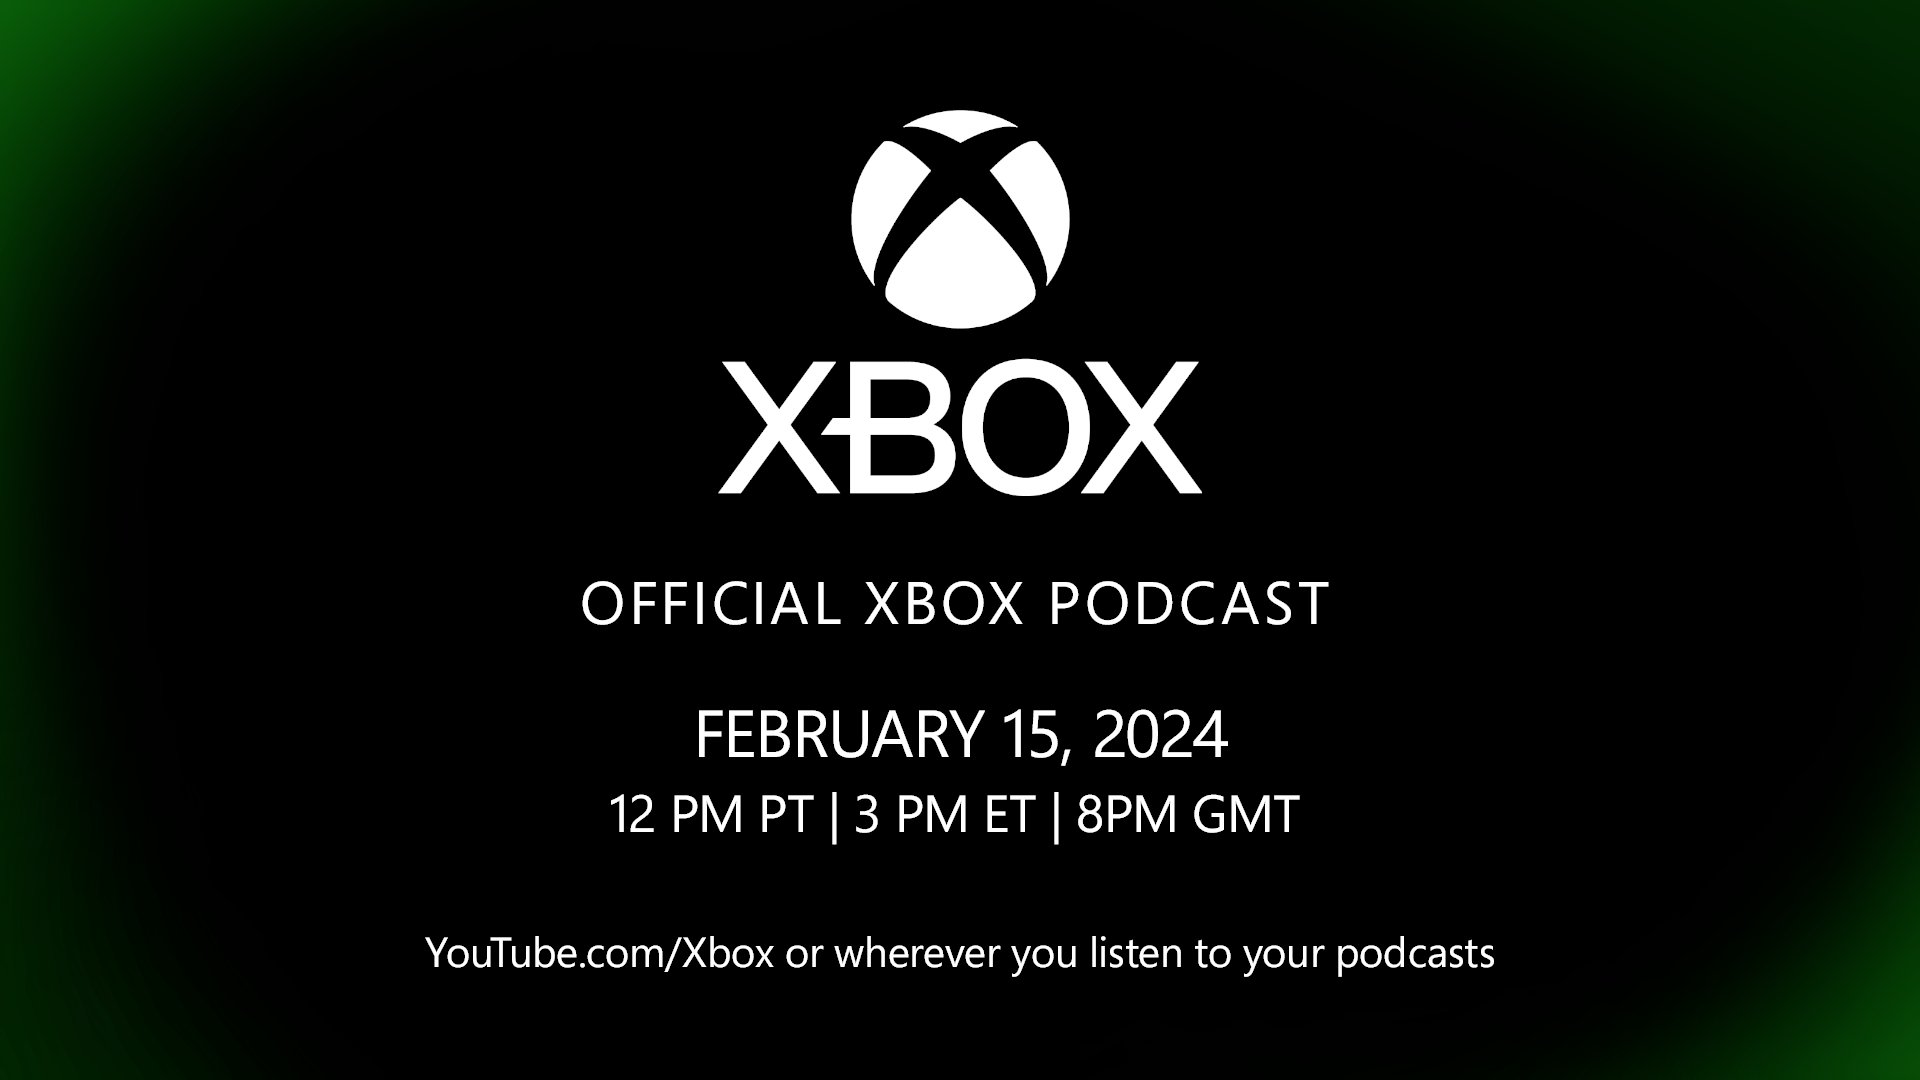 XBox hosting special podcast this week to update fans on its business